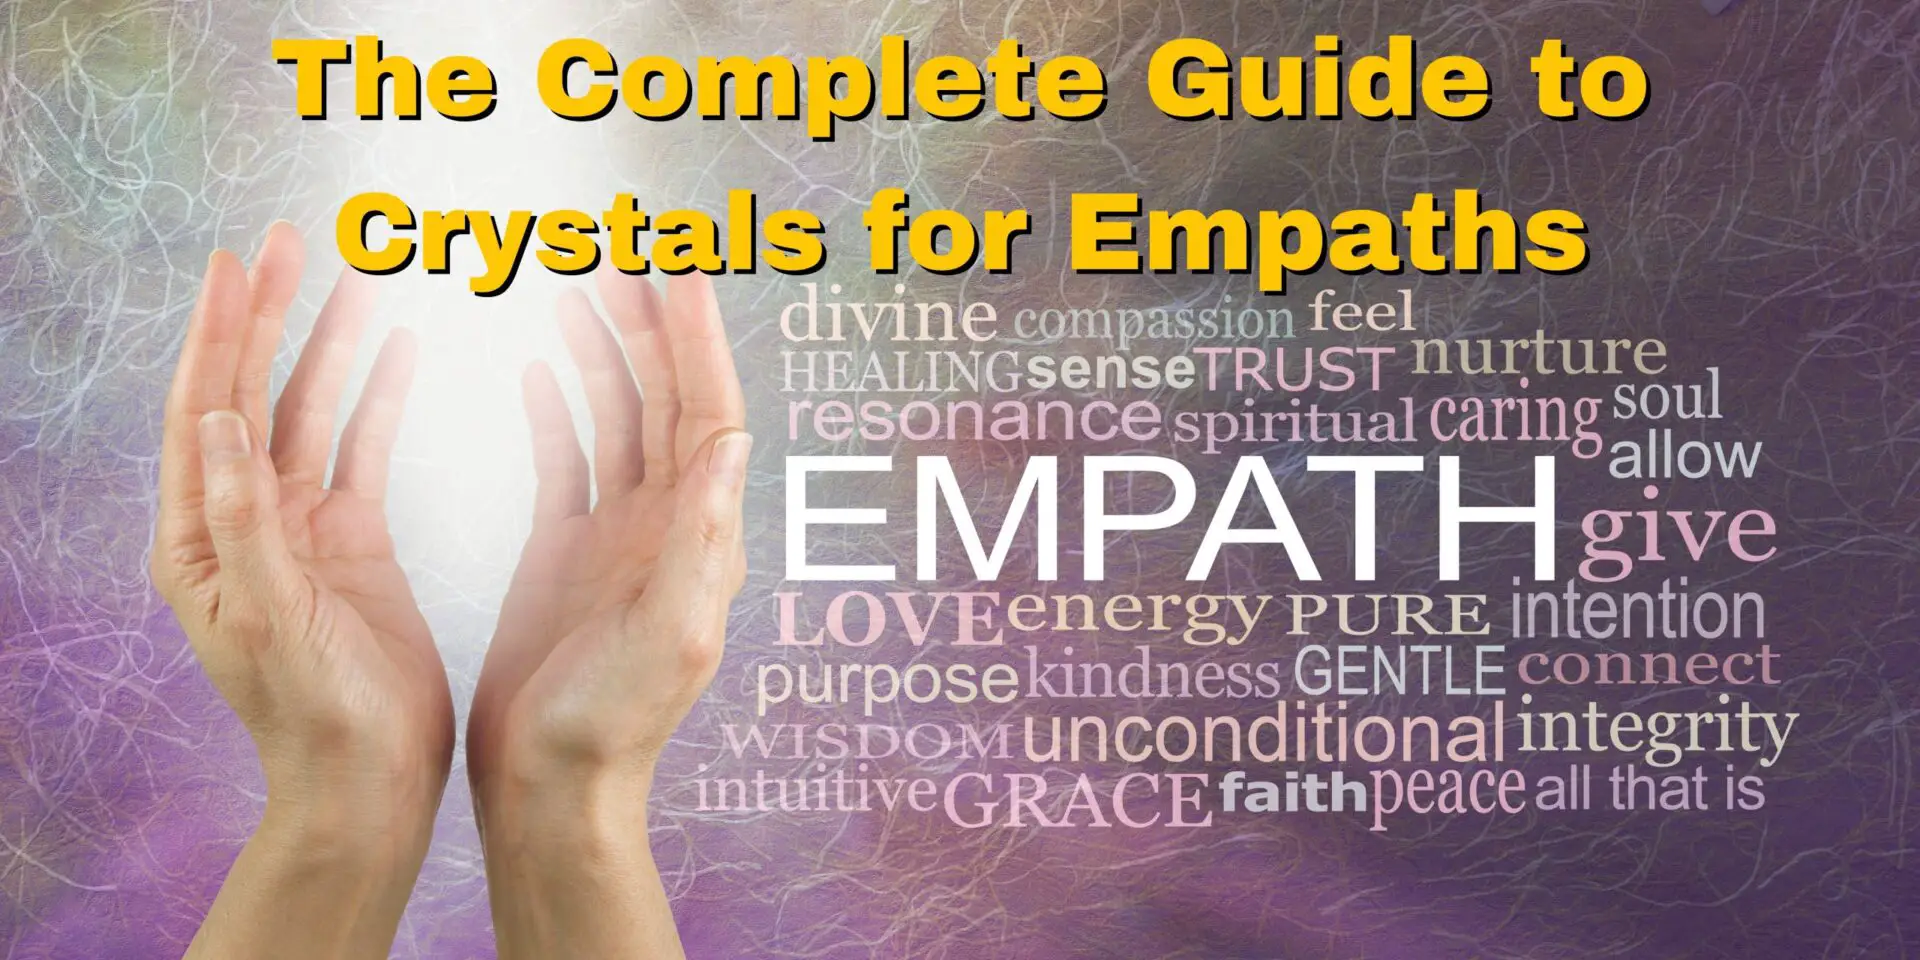 The Complete Guide to Crystals for Empaths